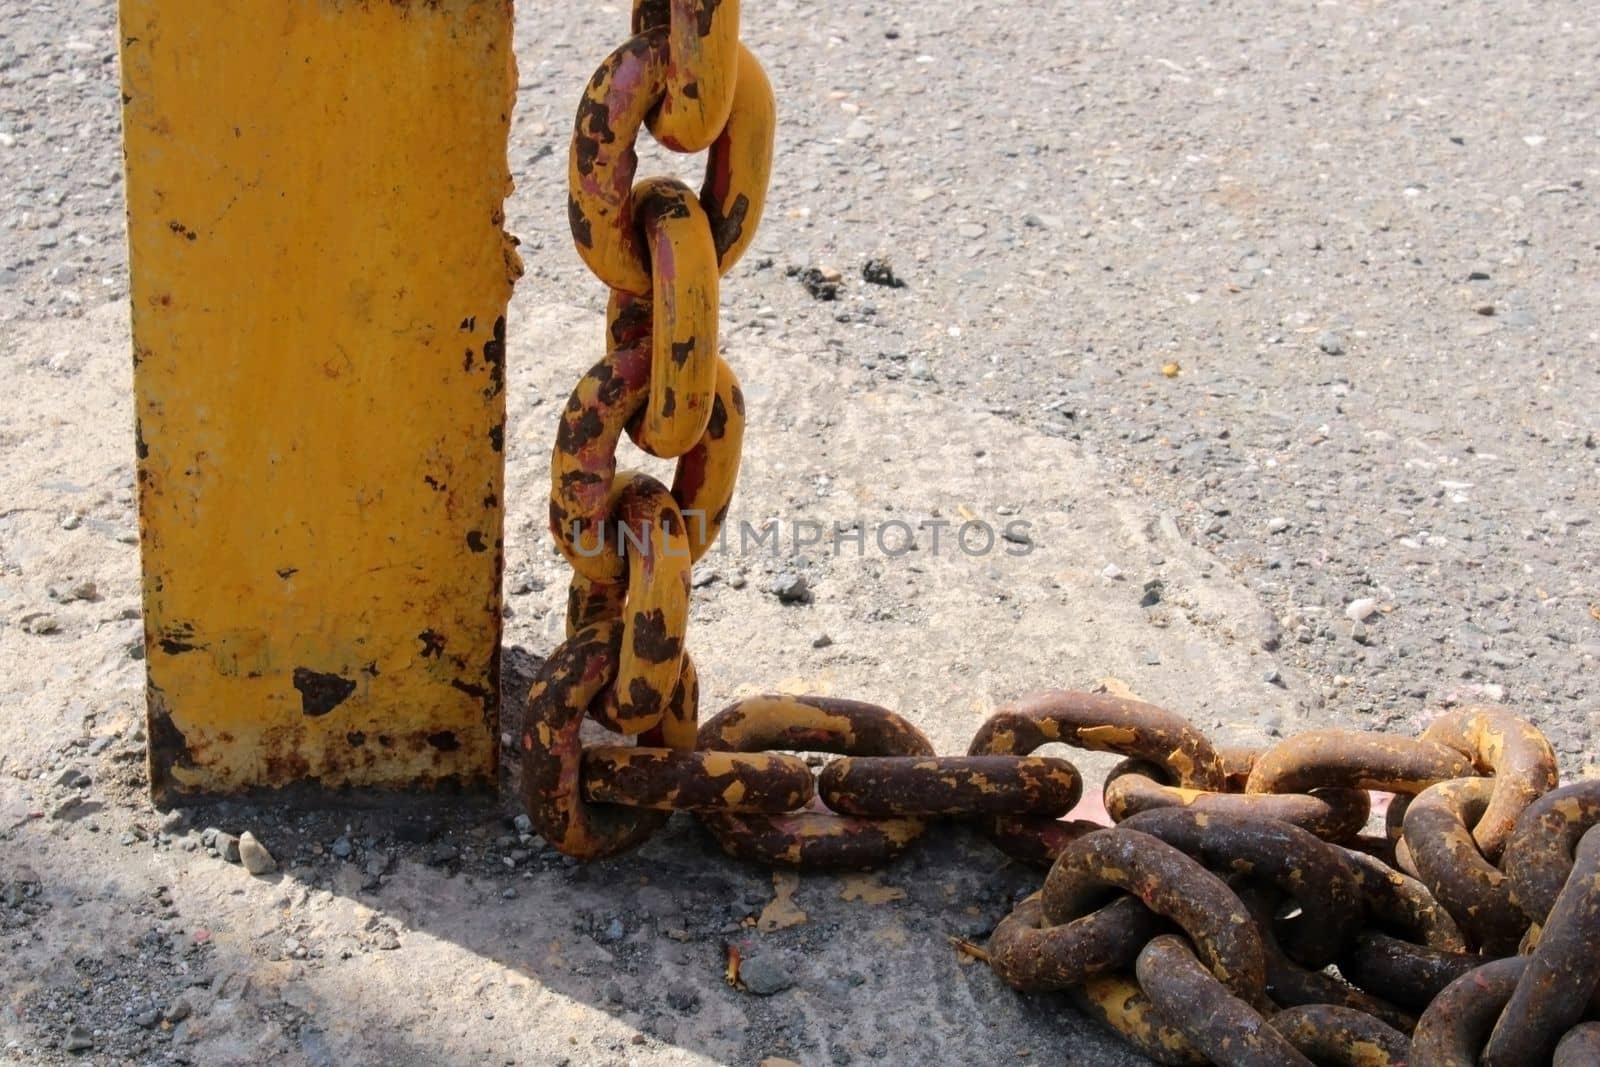 Old rusty yellow chain with large links close-up on a rack on the dock.